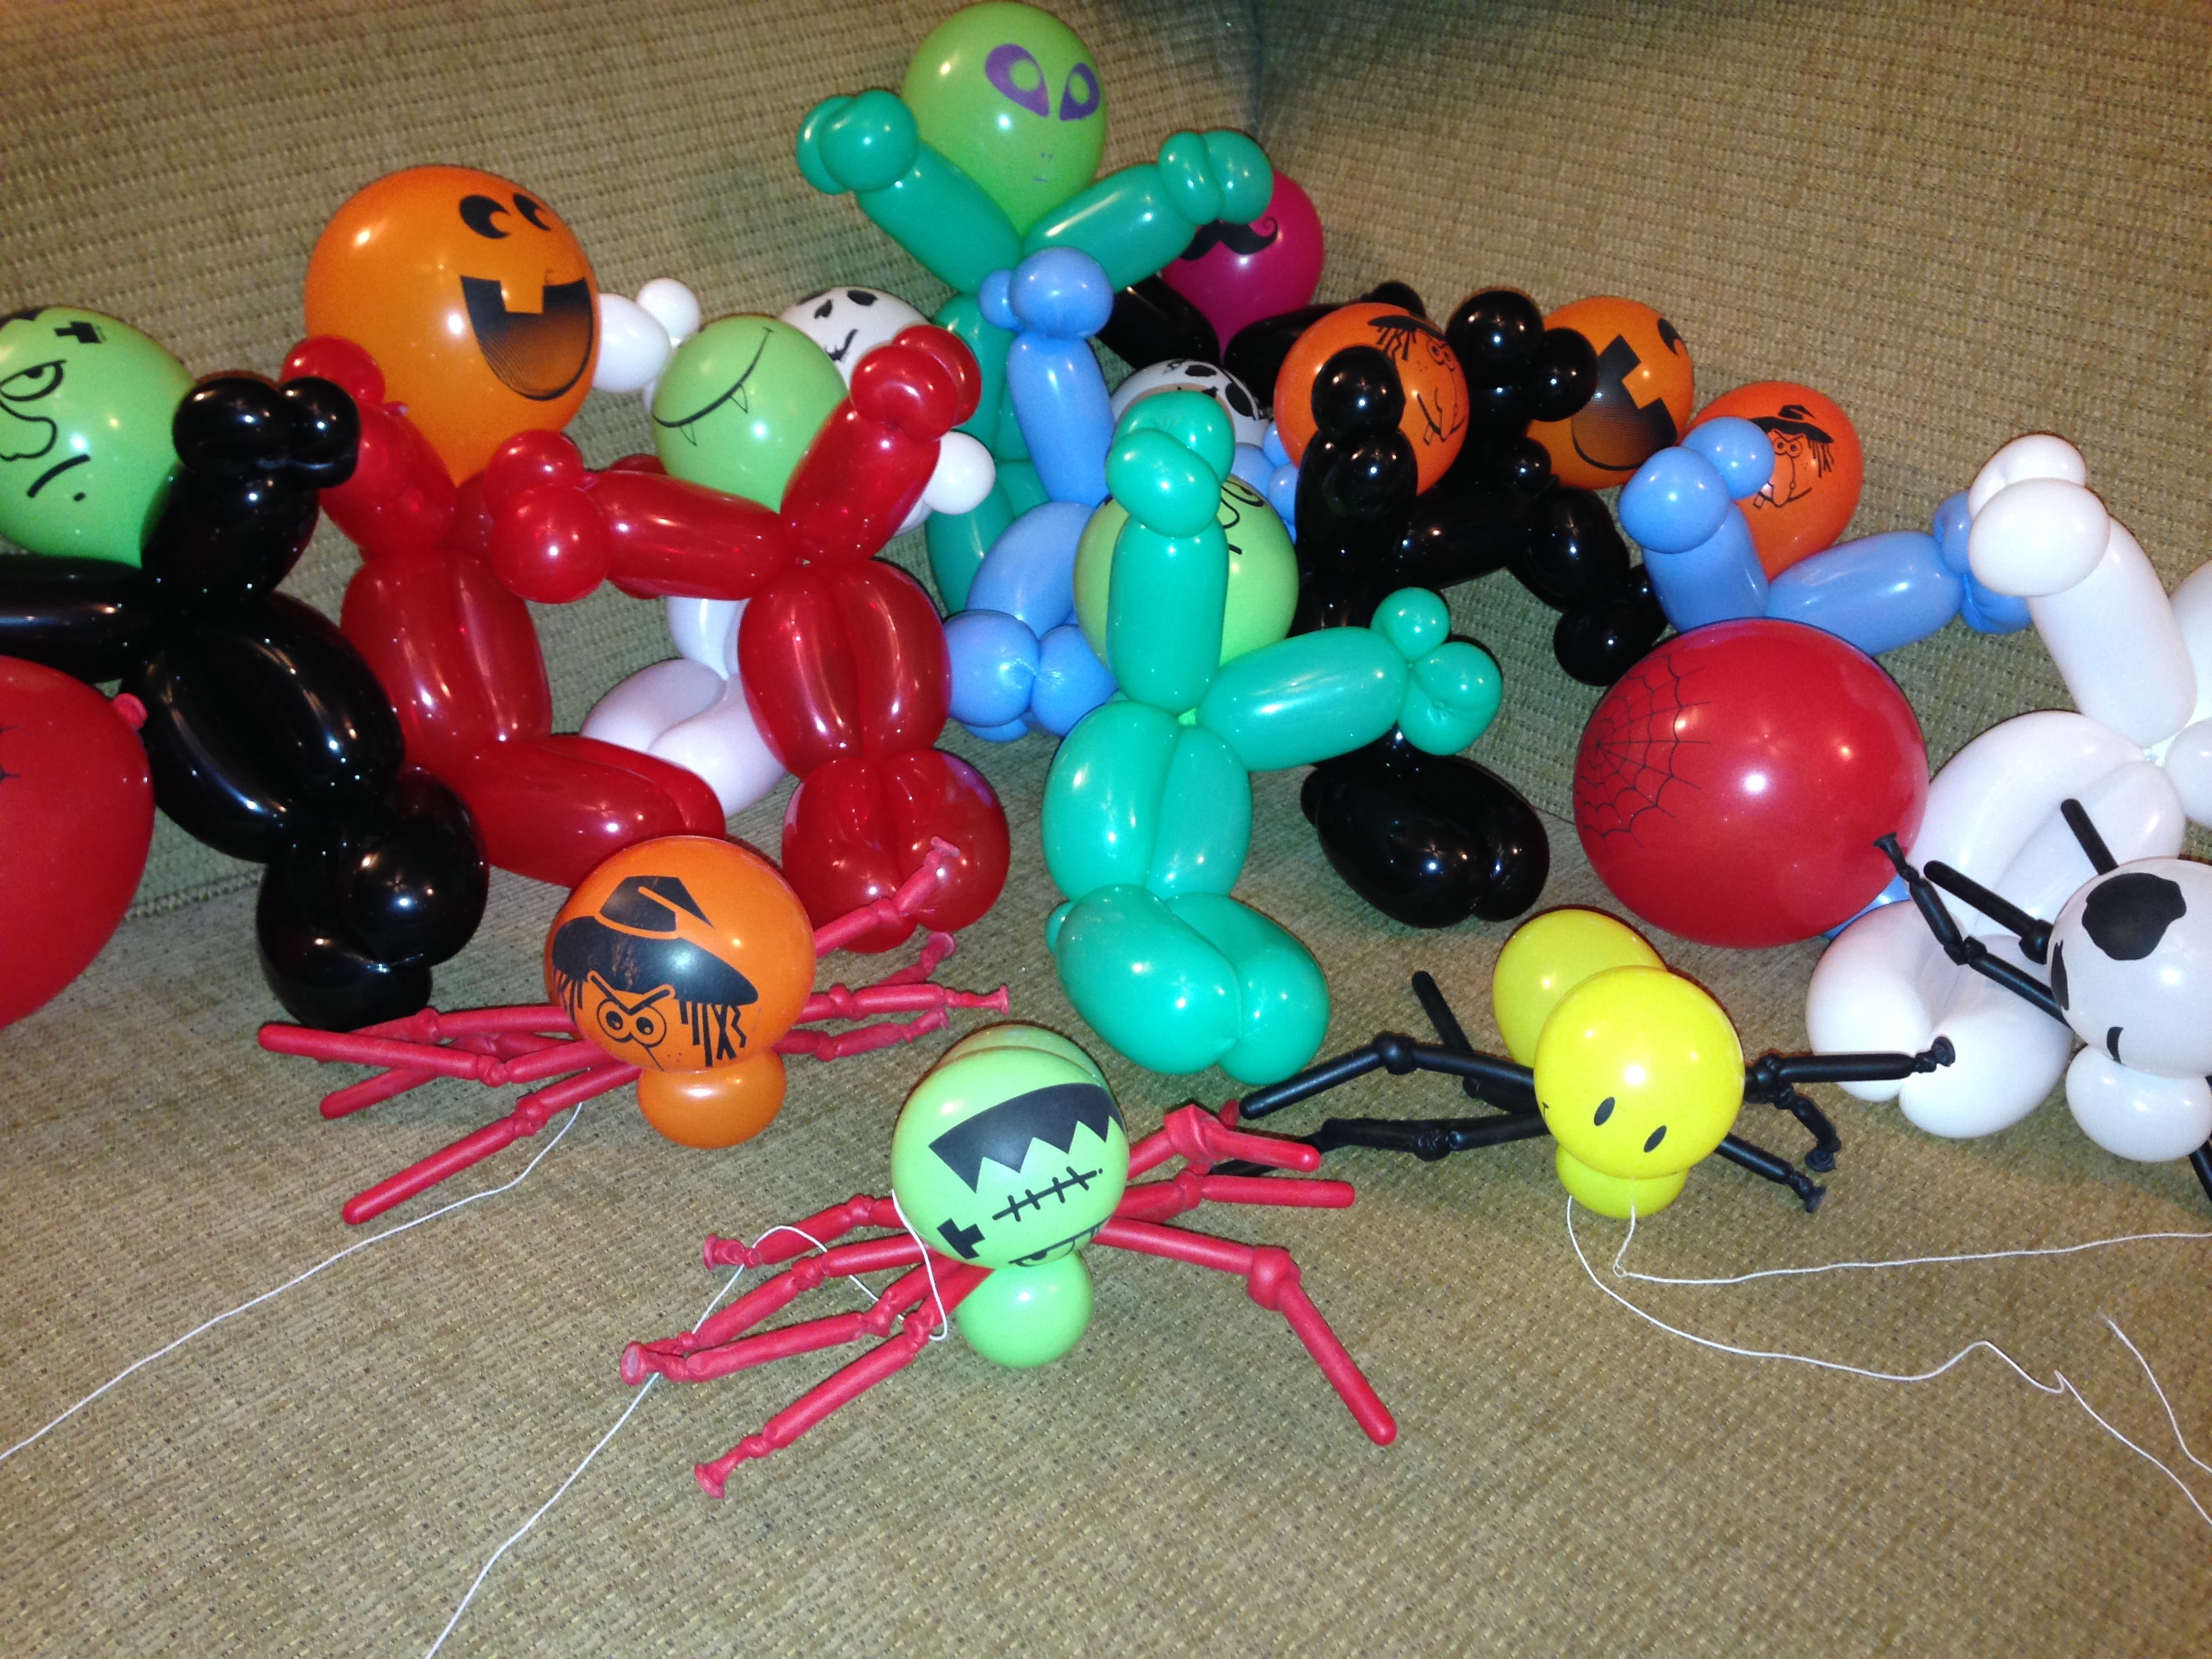 The Ballistic Balloonatic Party For Your Kids